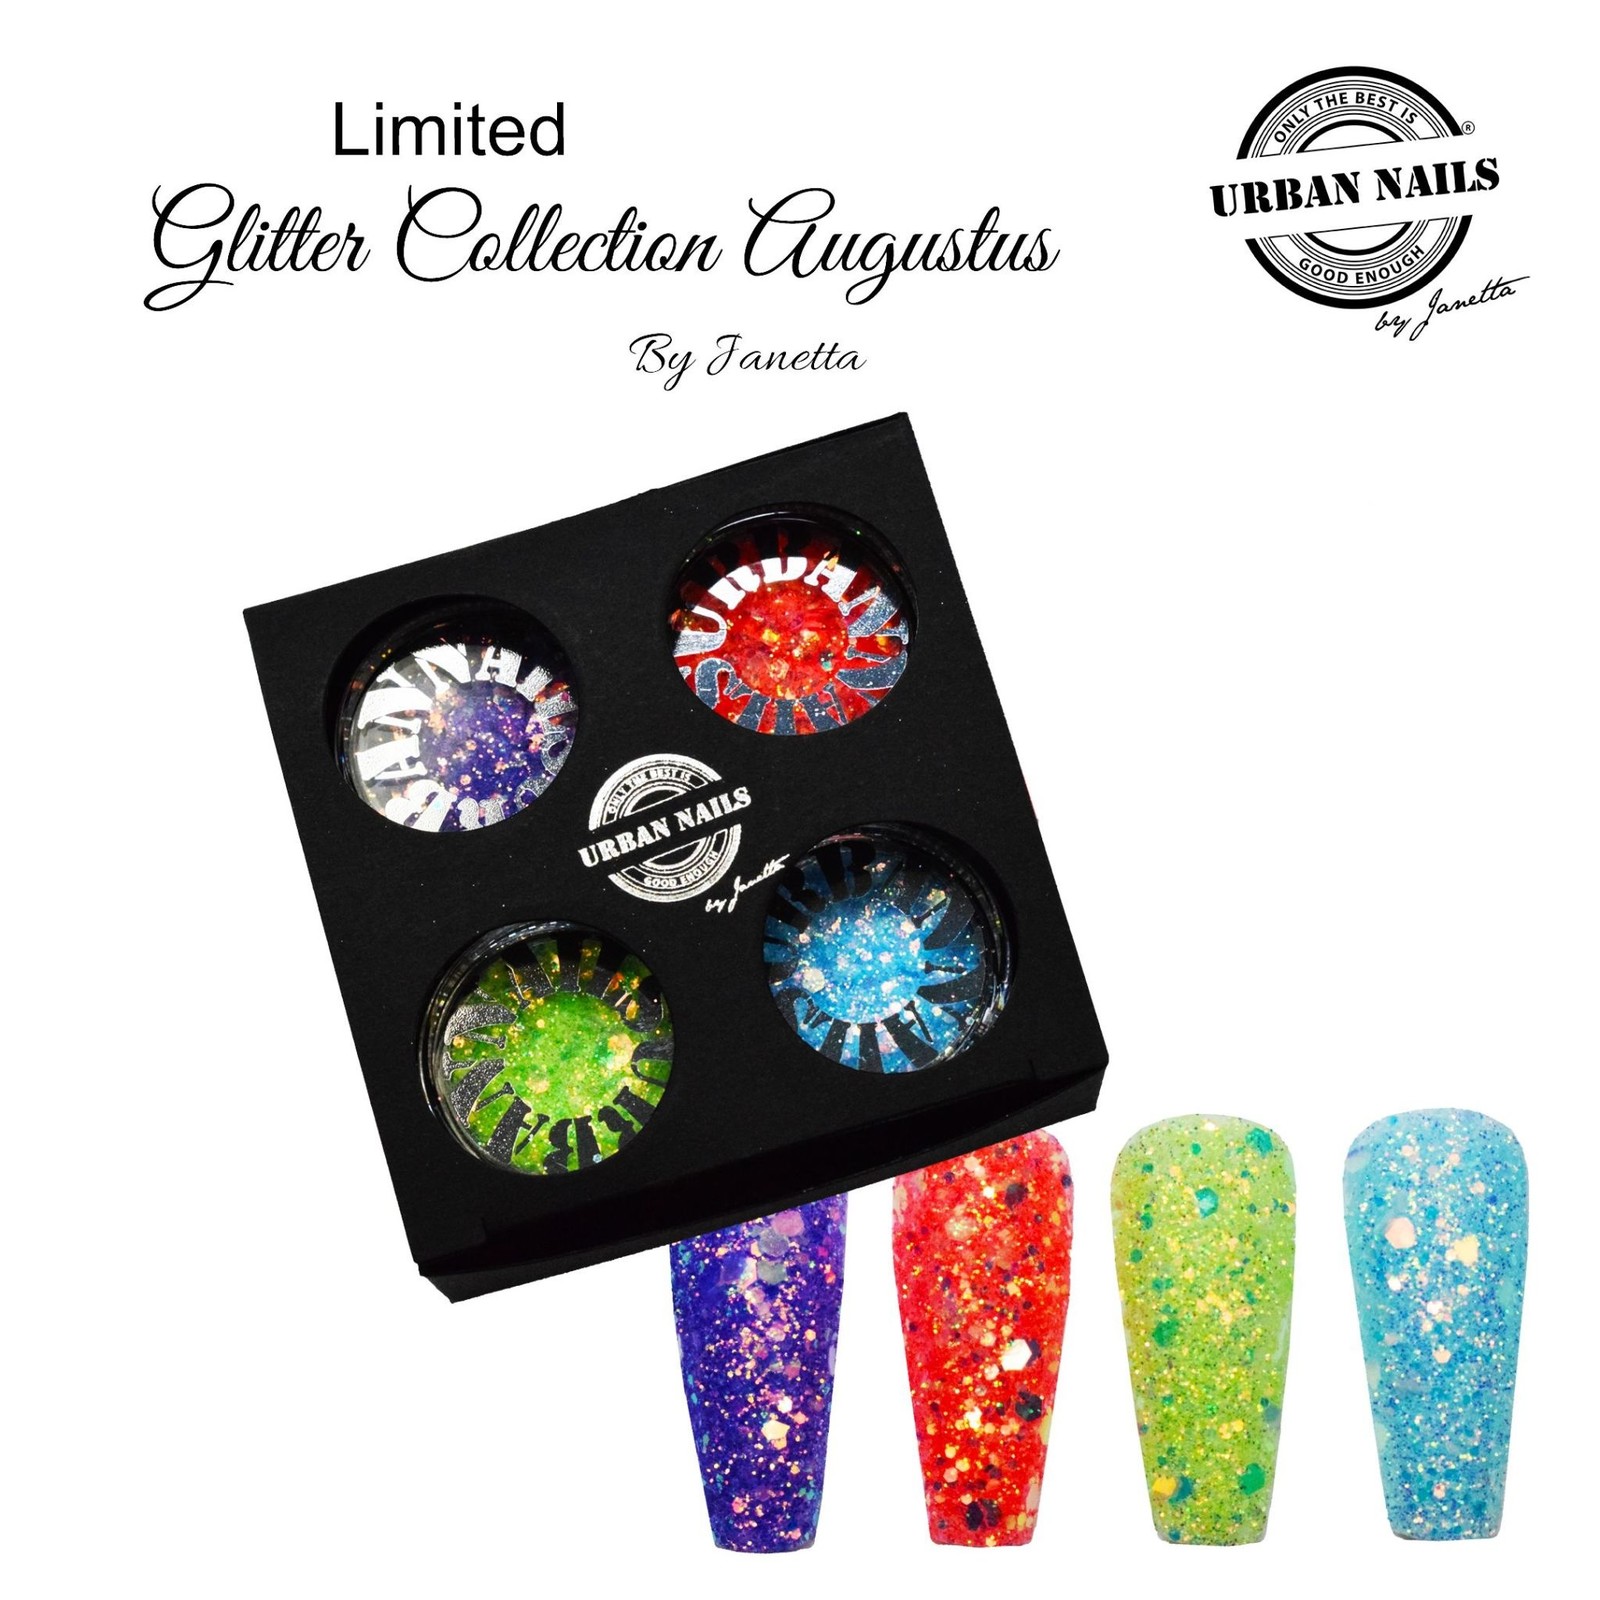 Urban nails Glitter Collection augustus